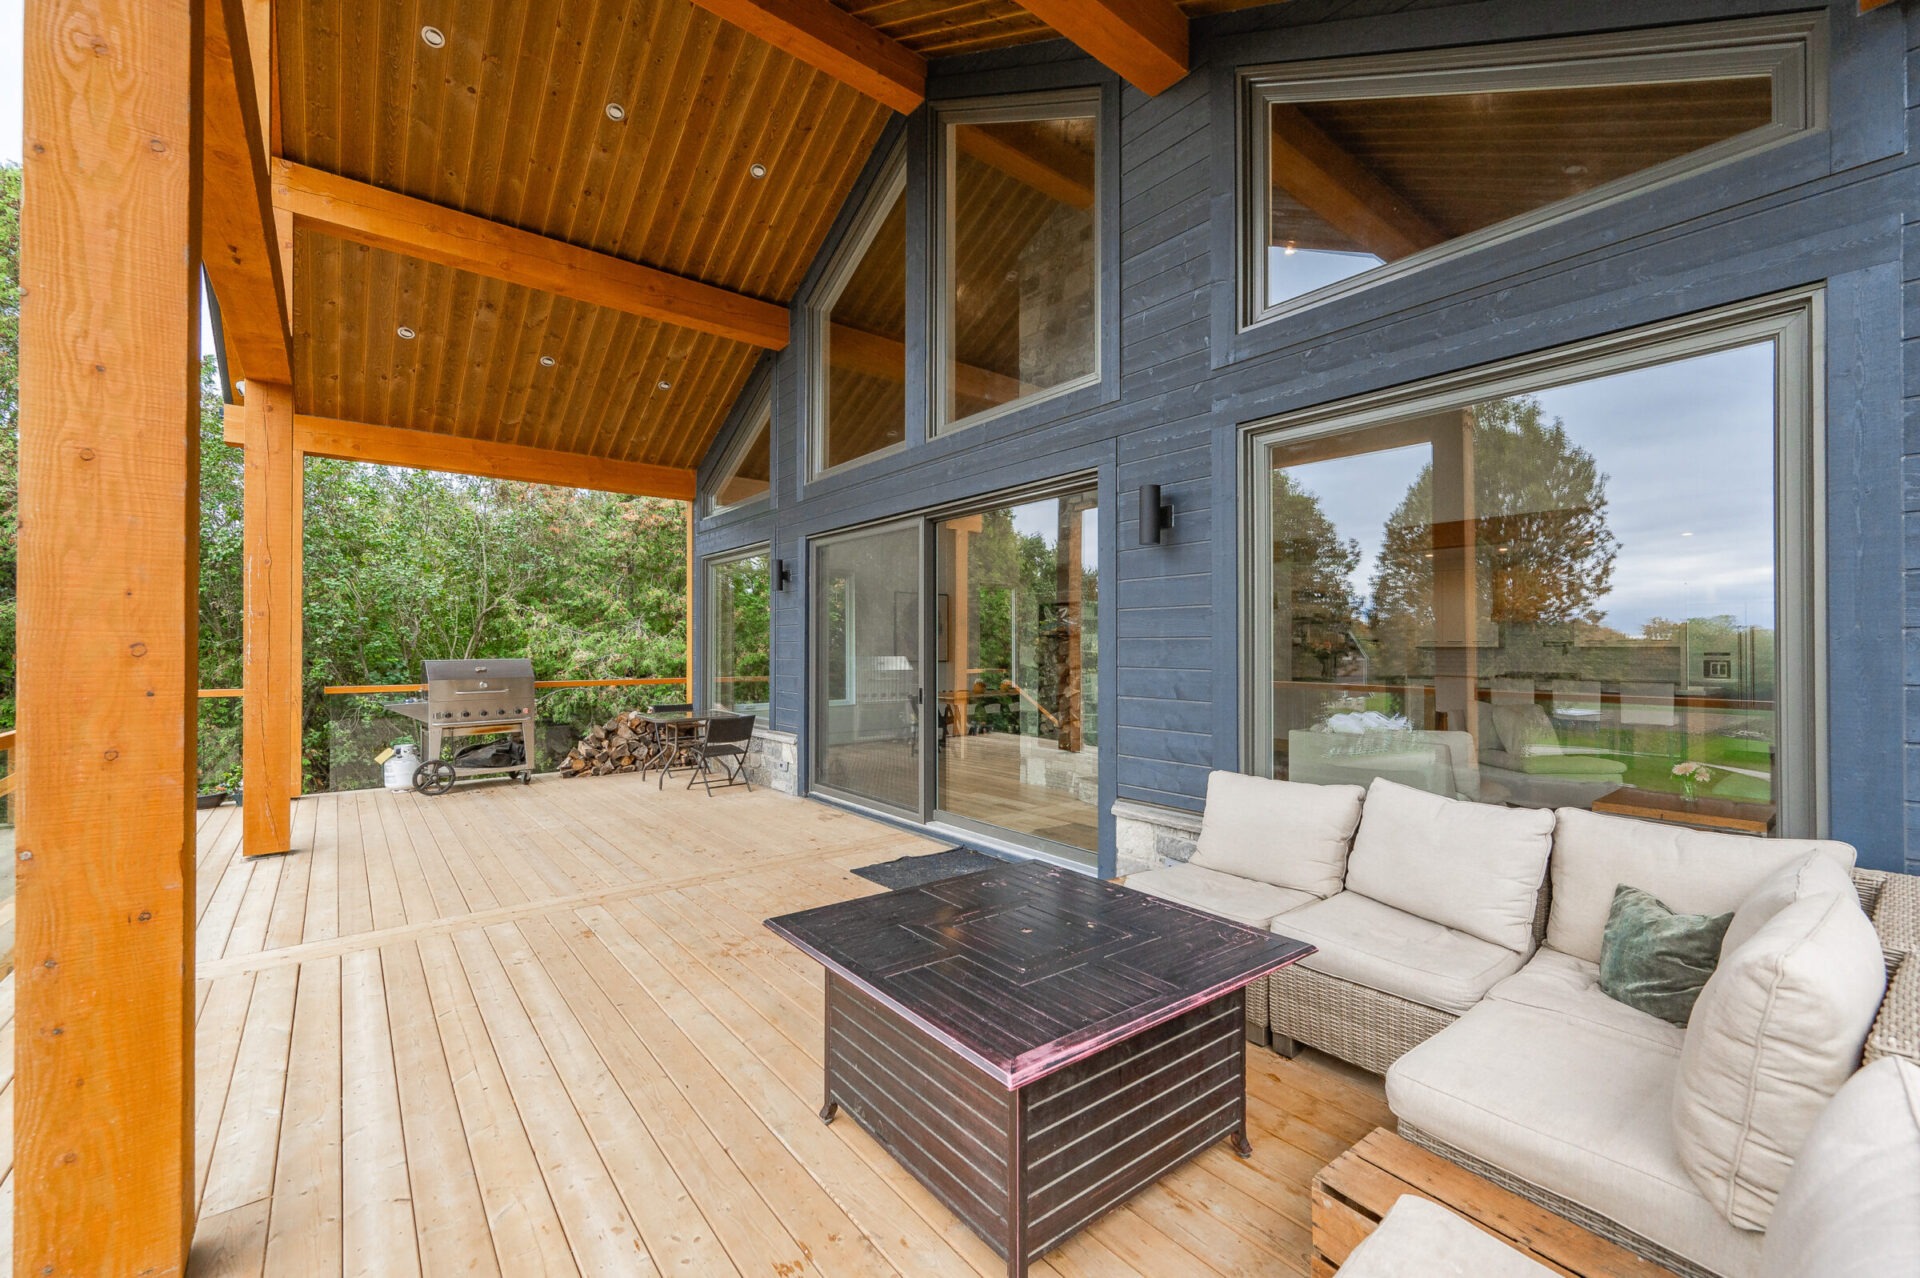 A cozy covered wooden deck features a rattan corner sofa, a grill, and overlooks a lush green yard with large windows reflecting the outdoors.